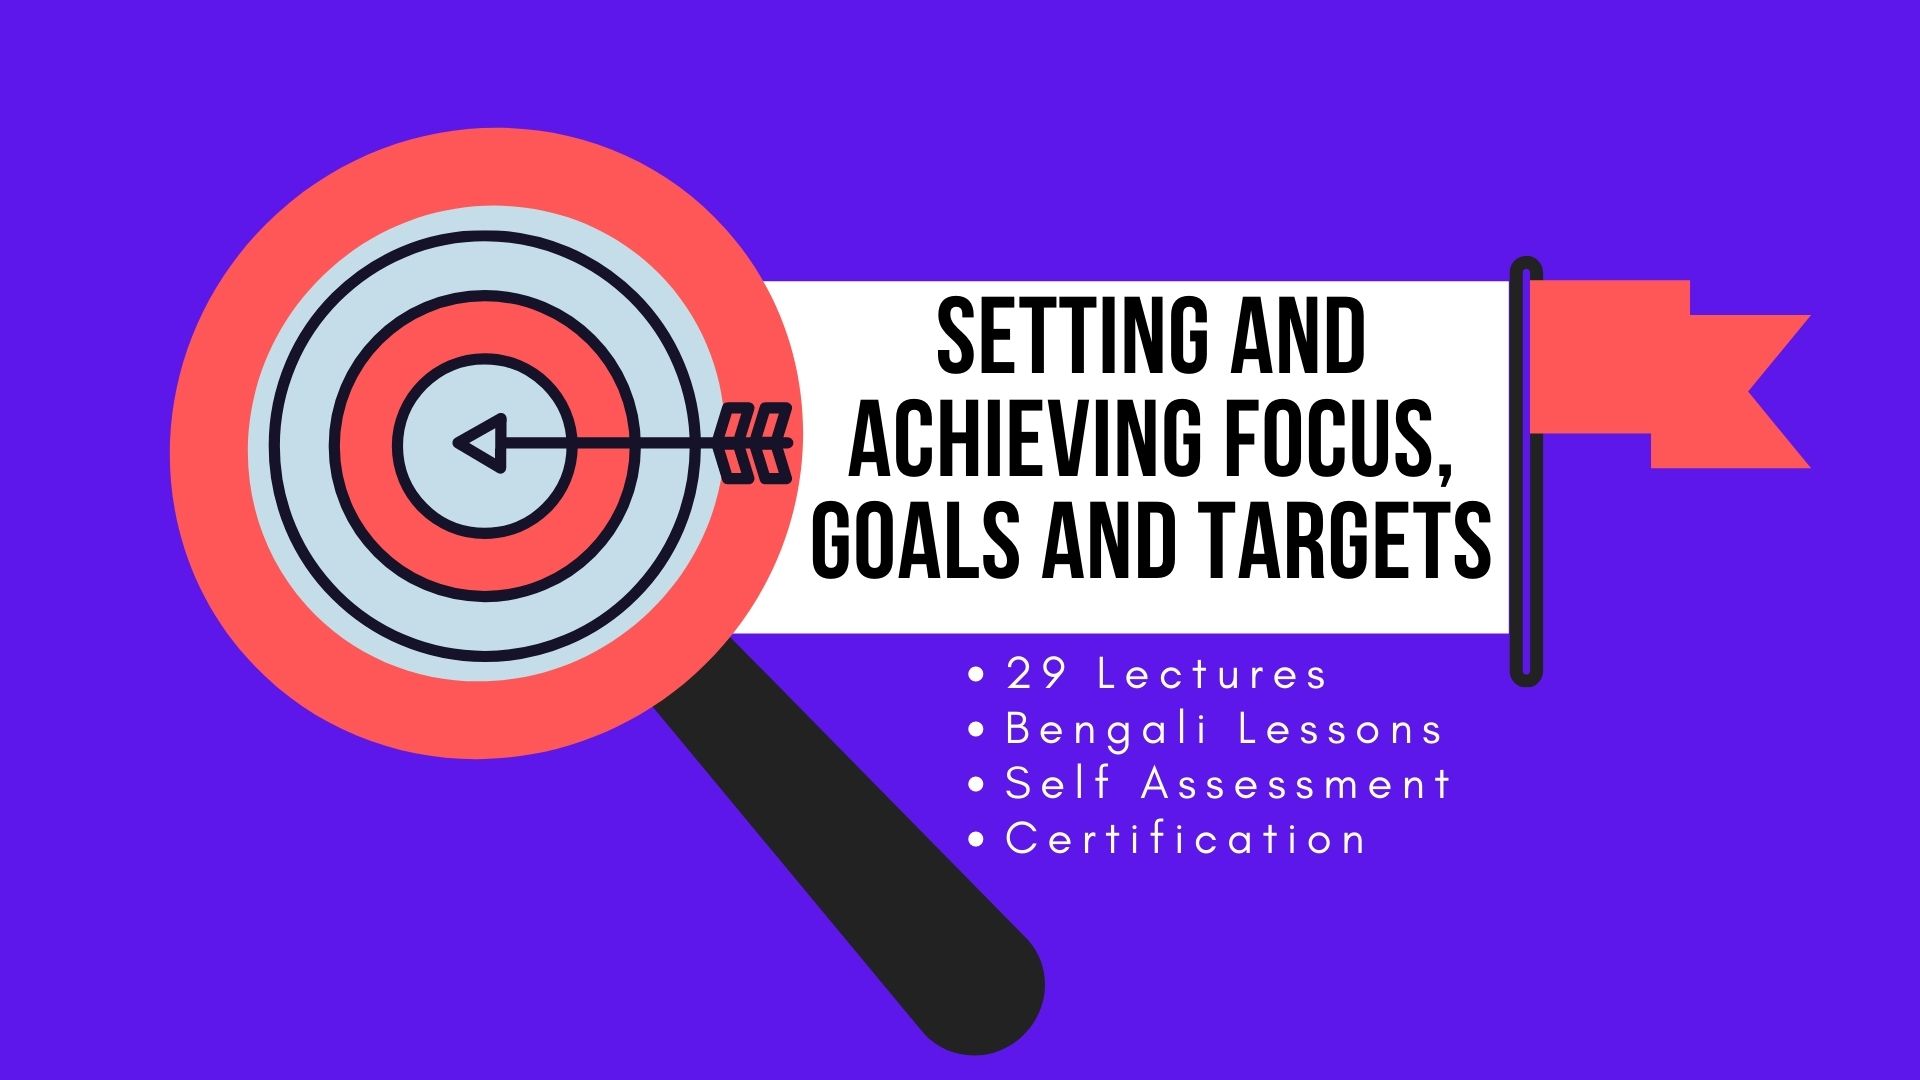 Setting and Achieving Focus Goals and Targets Course Image GoEdu